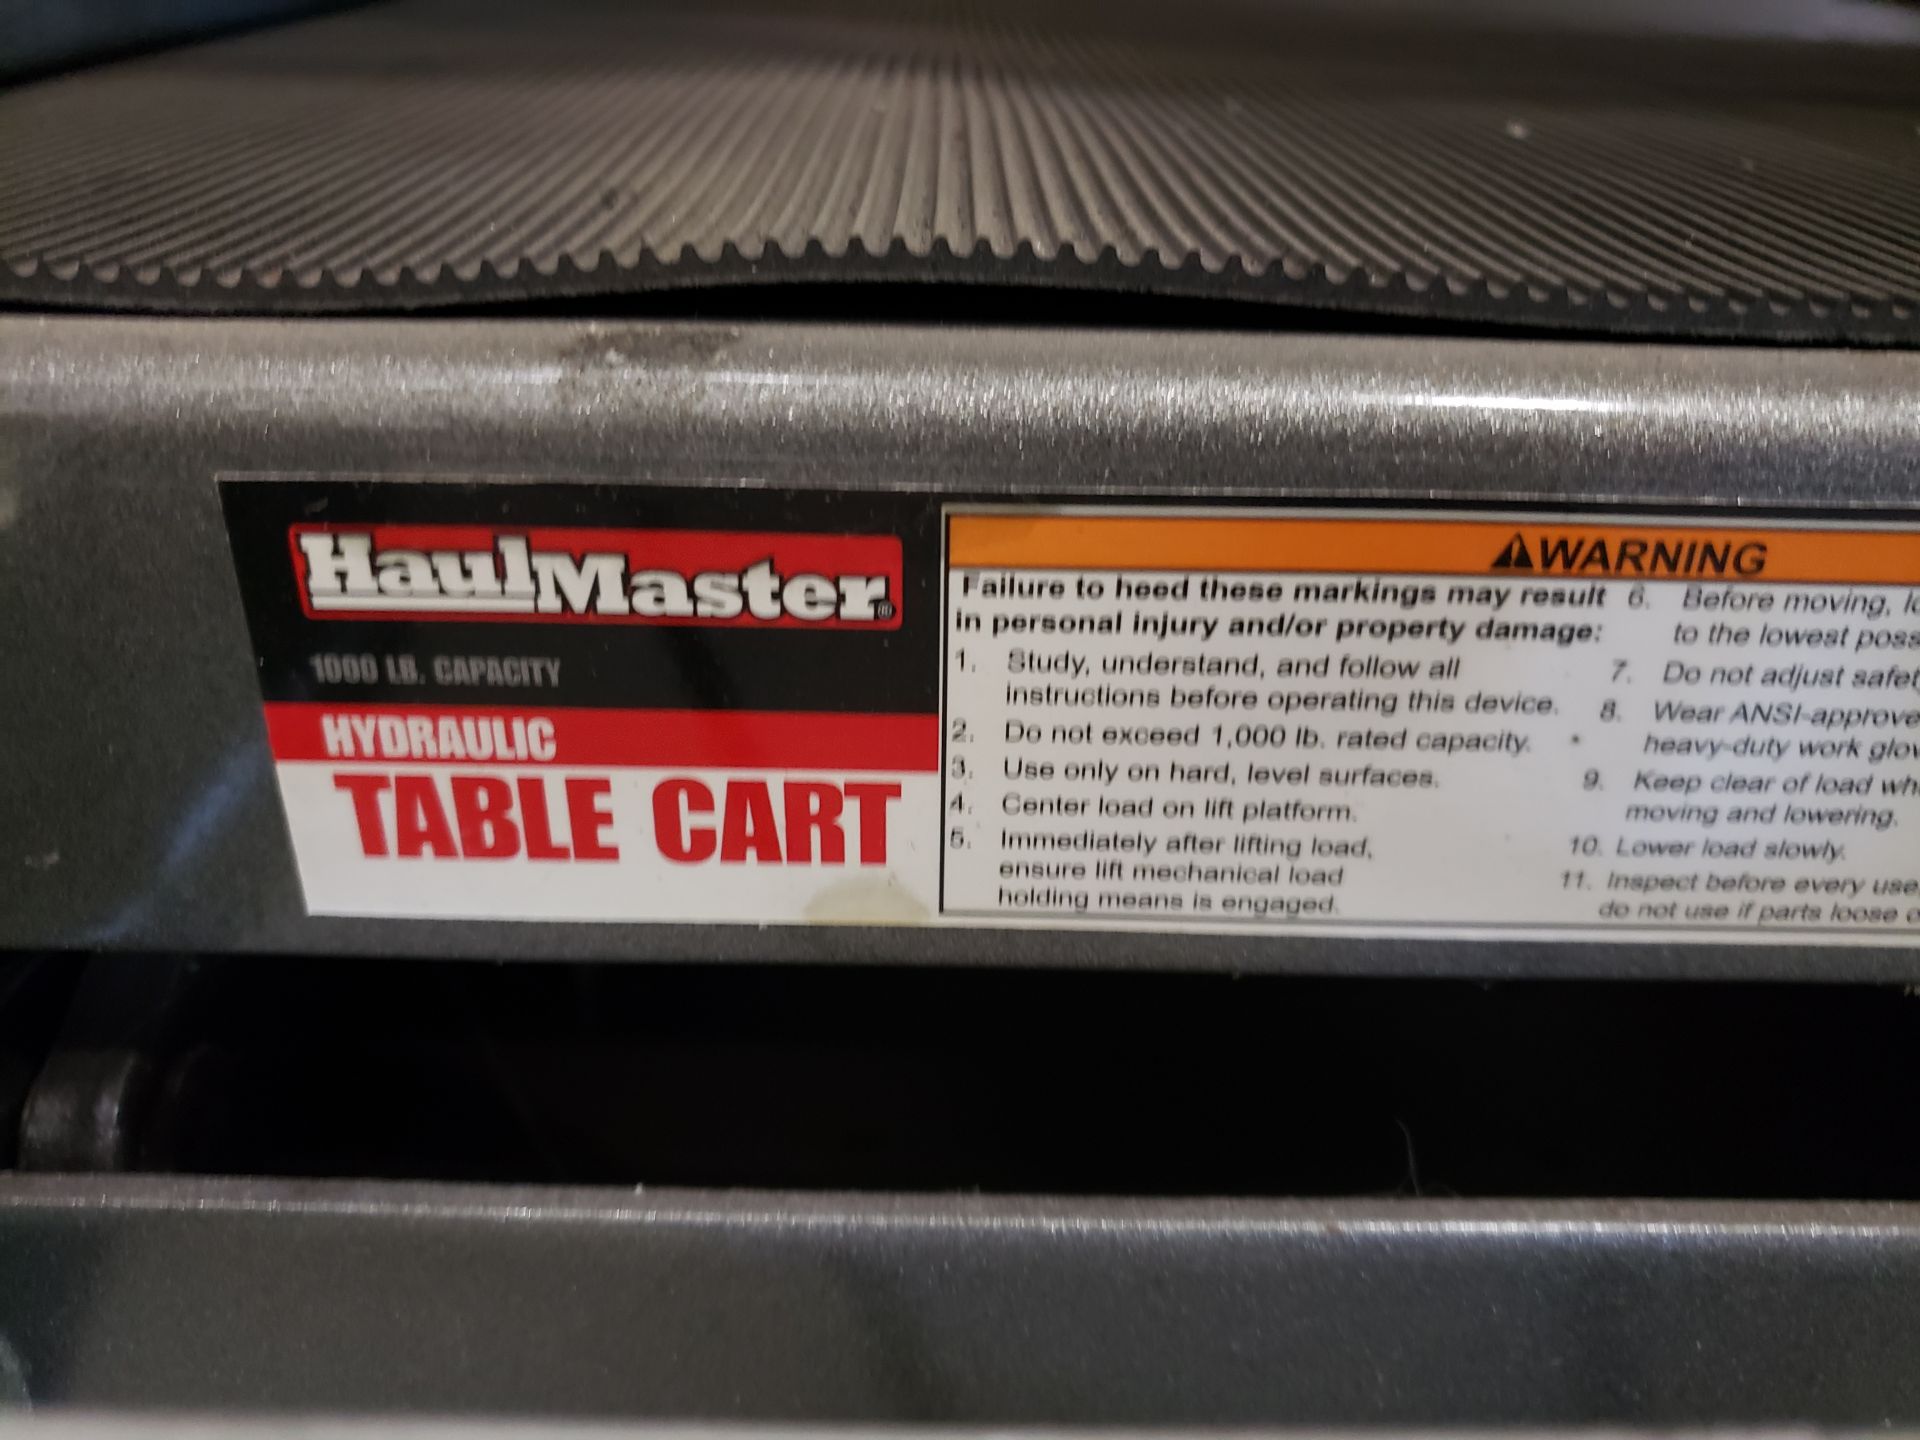 Lot of 2 HaulMaster Hydraulic Table Carts - Image 4 of 4